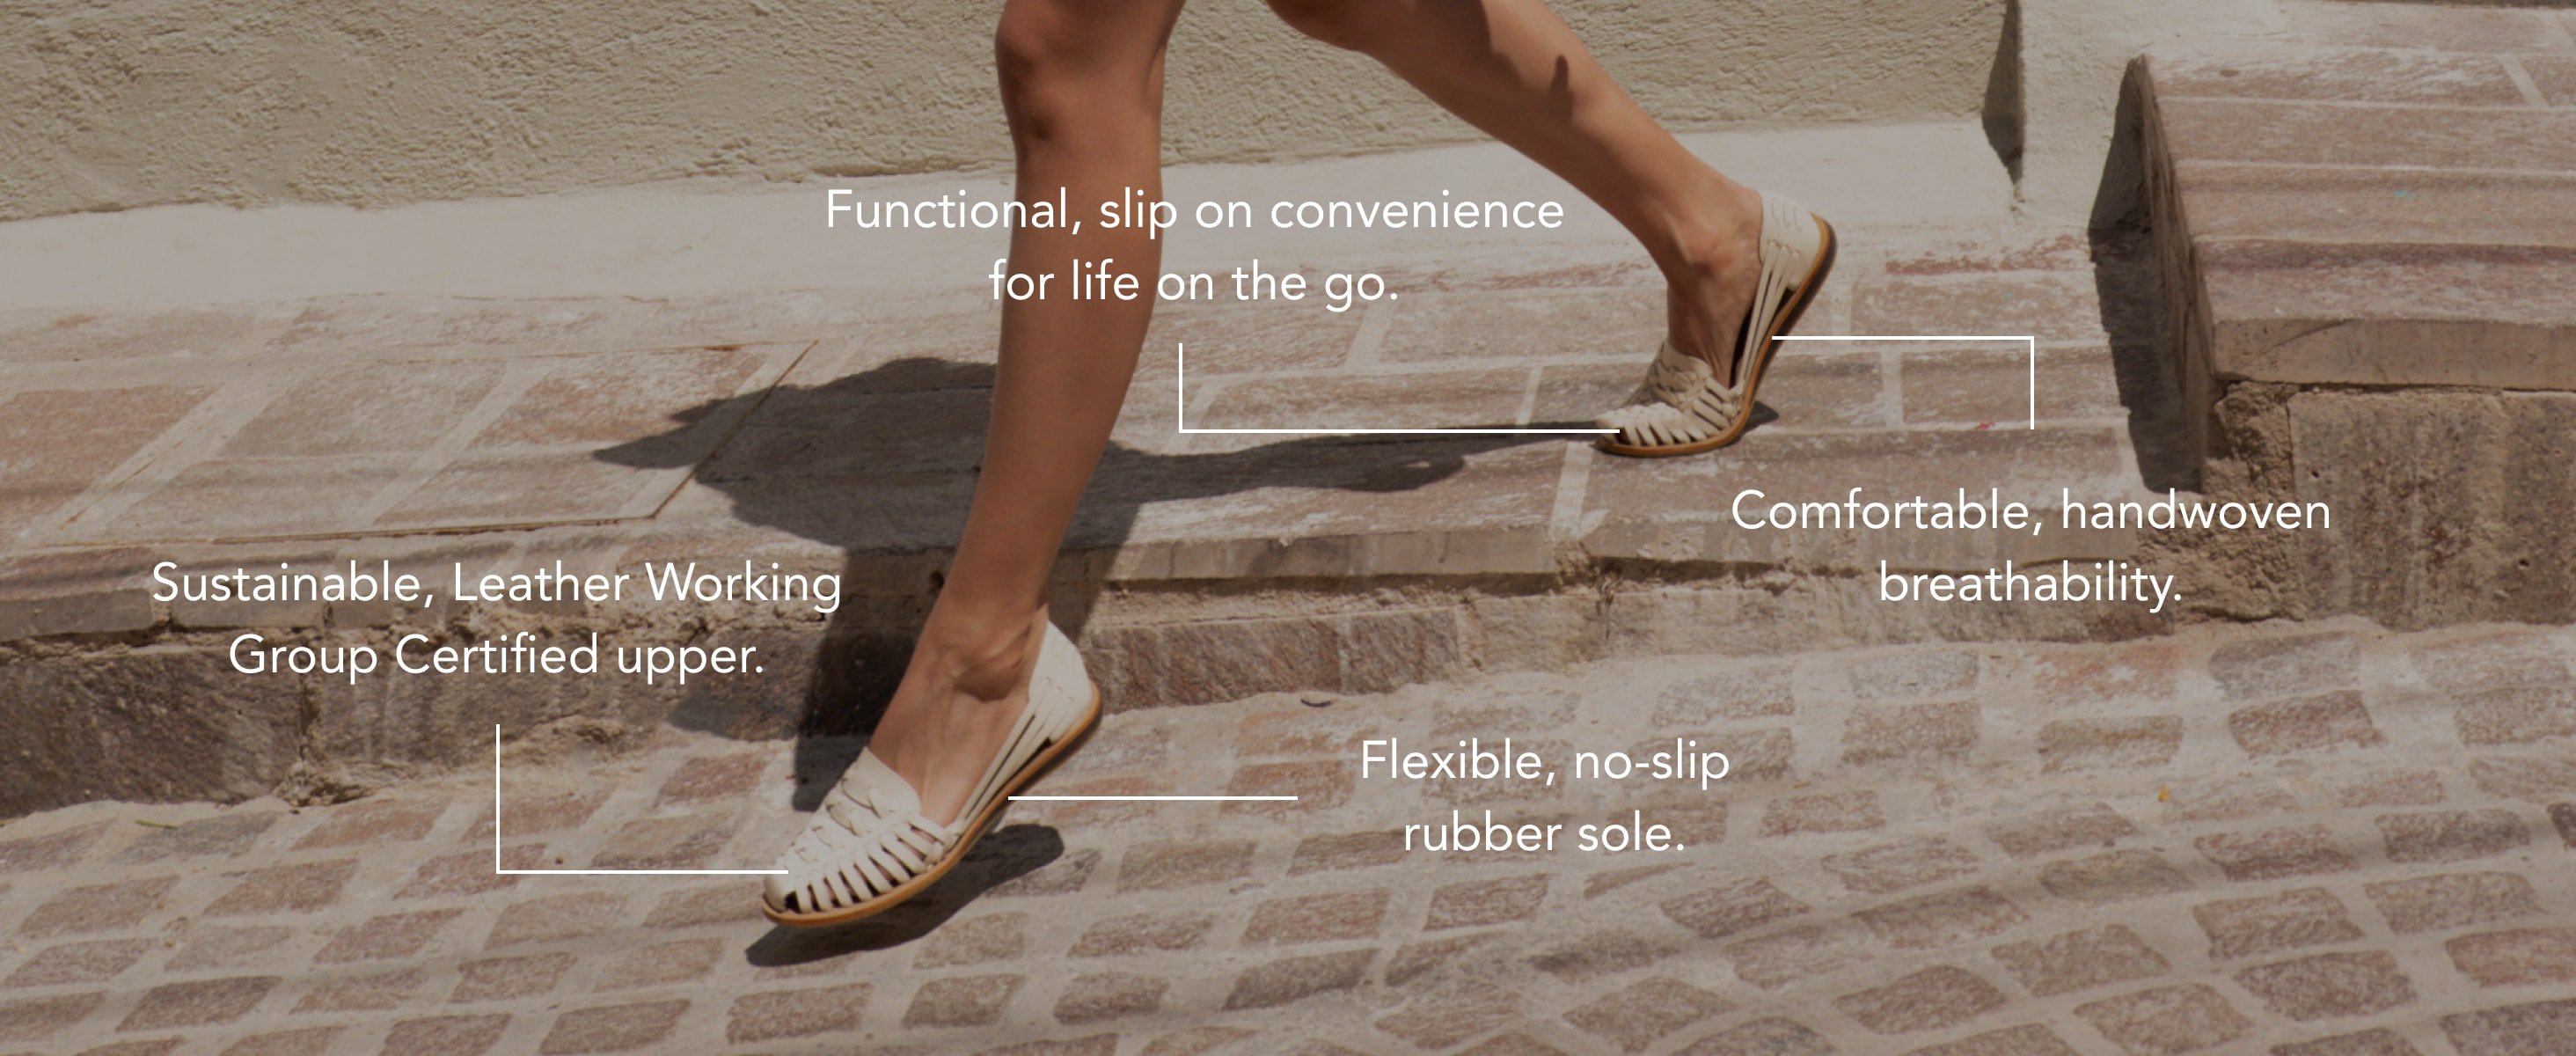 Nisolo Women's Huarache Sandal Bone - Every Nisolo product is built on the foundation of comfort, function, and design. 